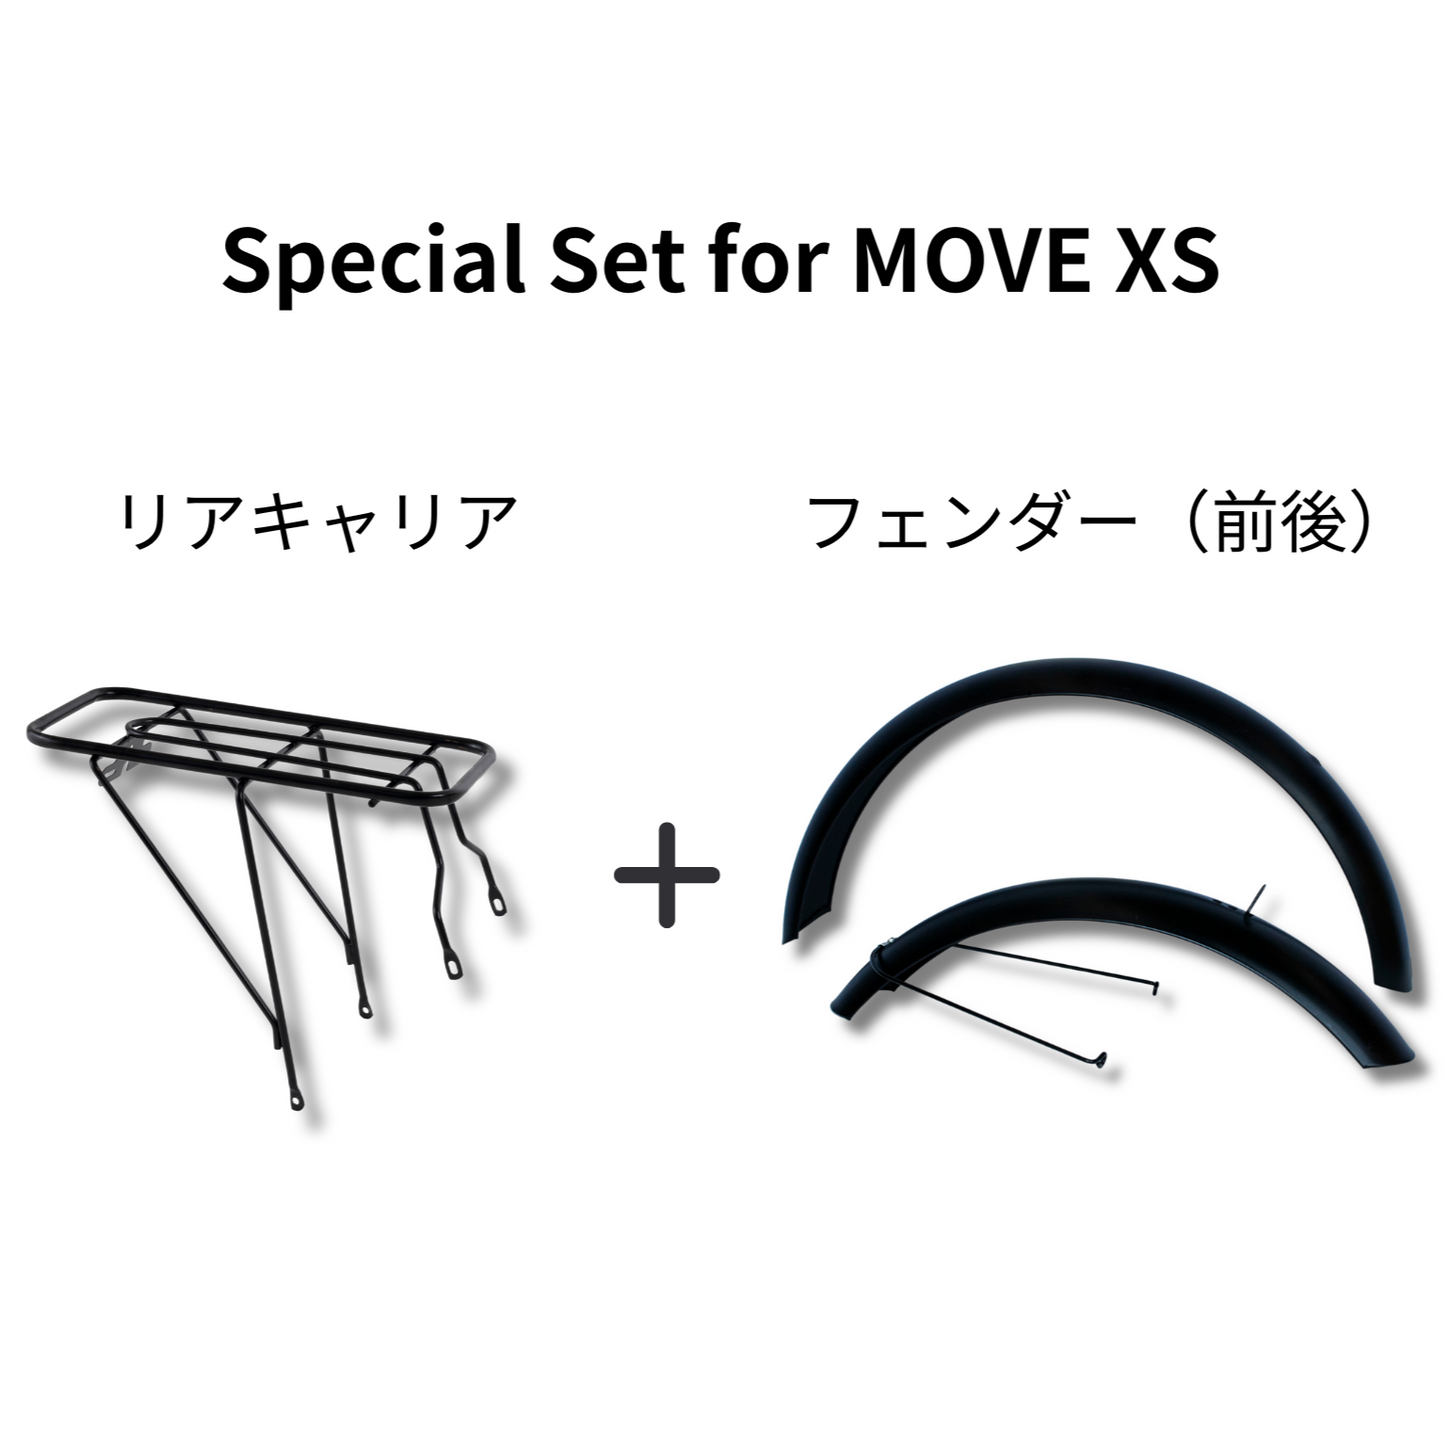 Special Set for MOVE XS